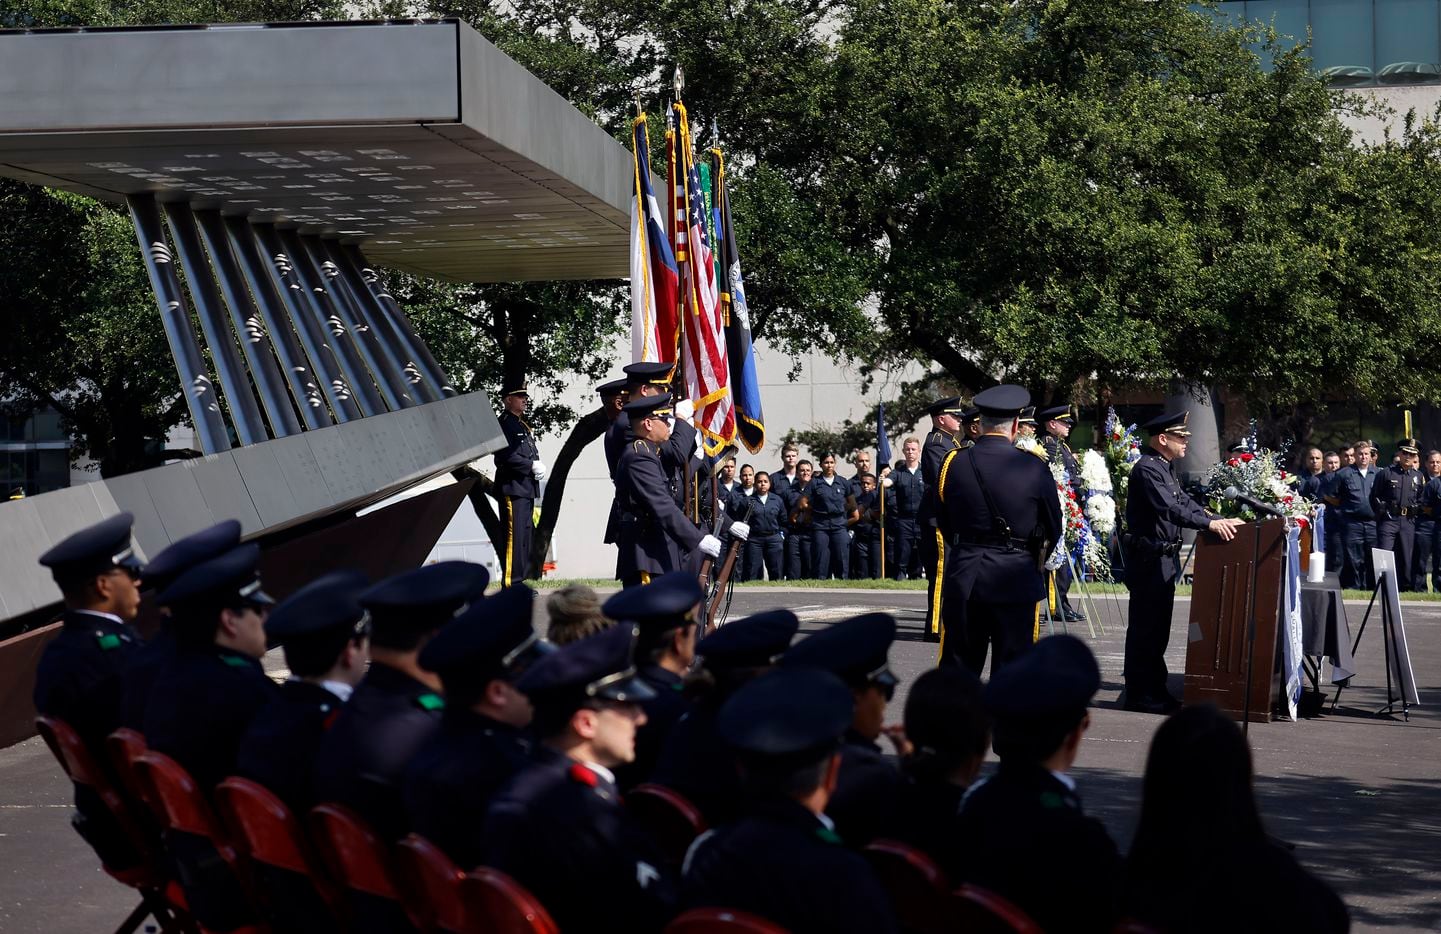 Dallas Police Chief Eddie Garcia (at podium) honored officers who died in the line of duty during the 2021 Police Memorial Day at the Dallas Police Memorial in downtown Dallas, Wednesday, July 7, 2021. It was the 5th anniversary of the July 7th ambush and special recognition was given to those officers who were killed. (Tom Fox/The Dallas Morning News)